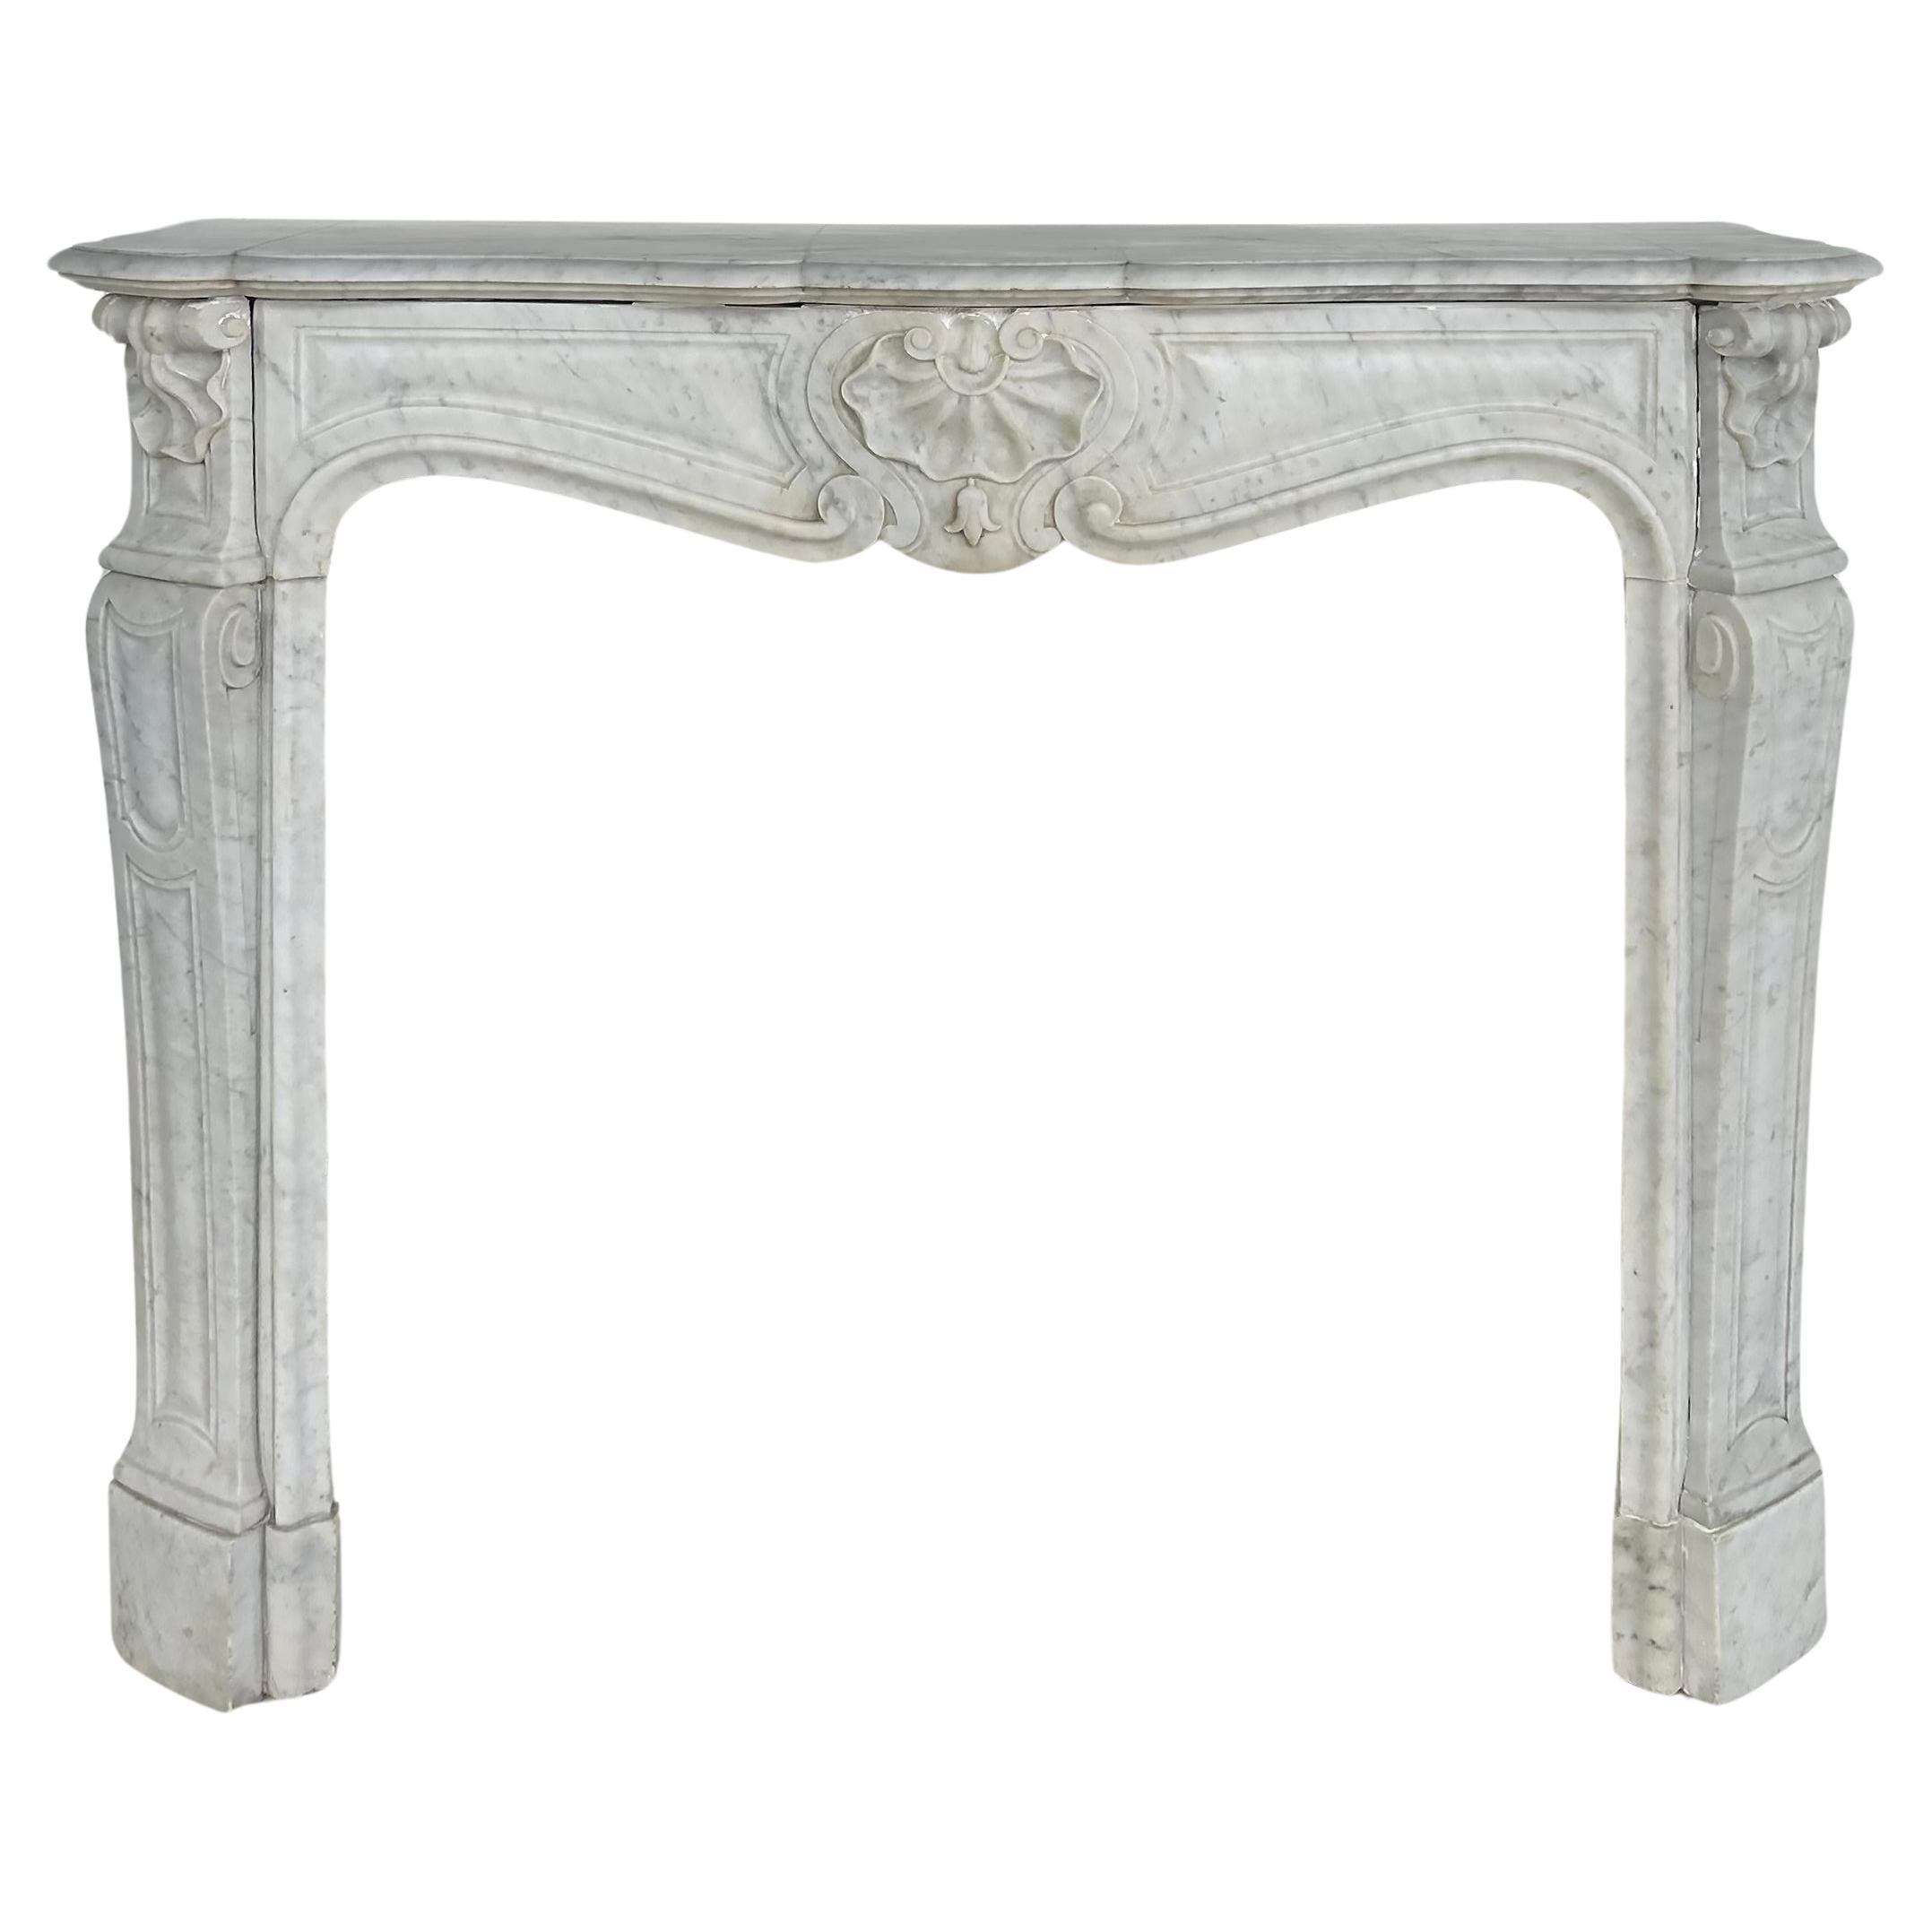 Antique French Carrara Marble Louis XV Style Fireplace Mantel 